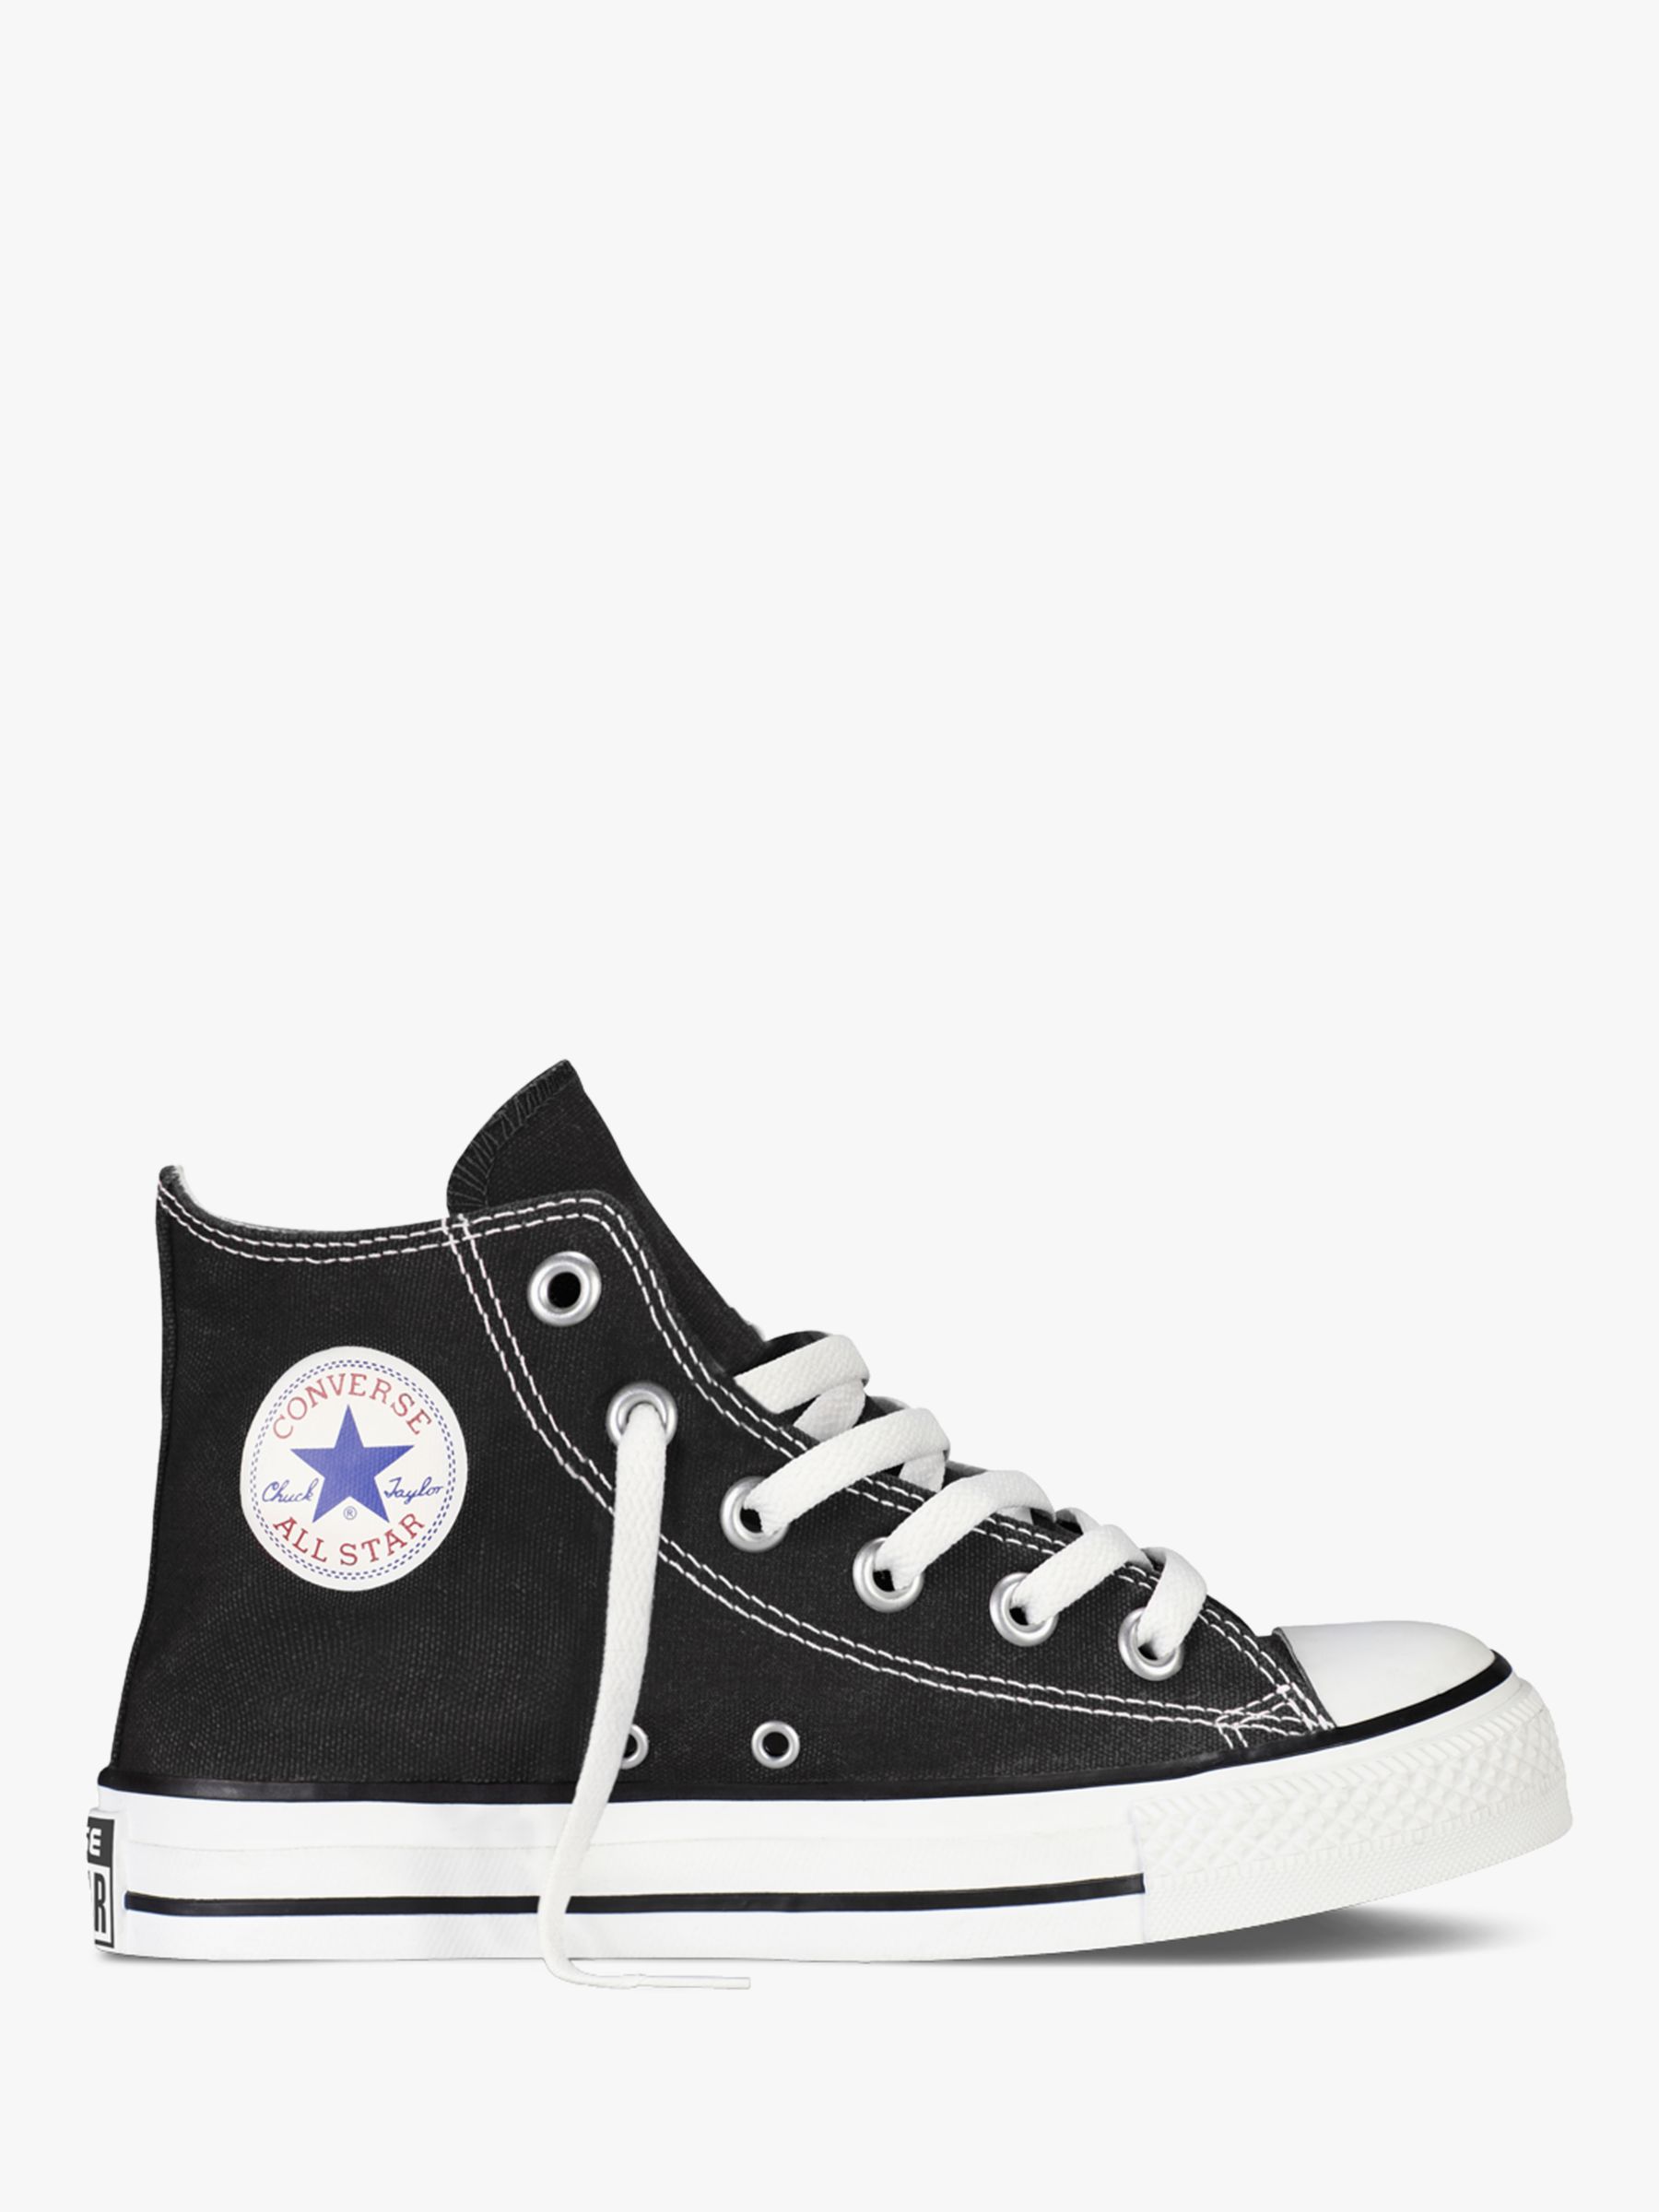 converse boots childrens shoes